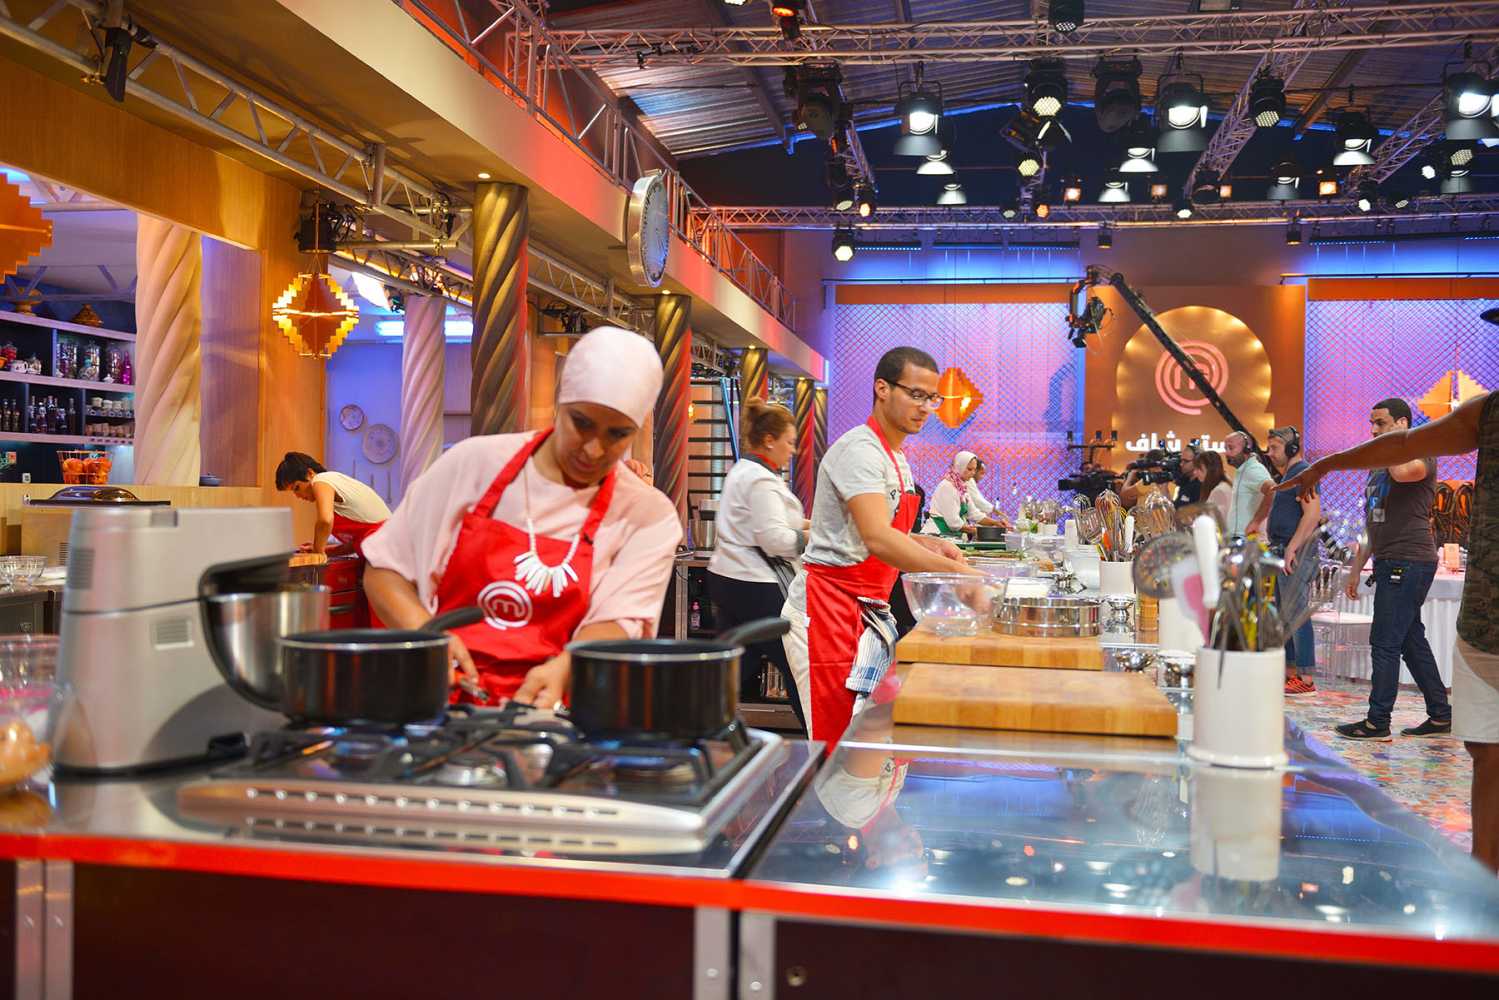 MasterChef Algeria which was recorded in a purpose-built studio and former envelope factory in El Hamis, a suburb of Algiers (photo: Brahim Boucherit, Allégorie Groupe)